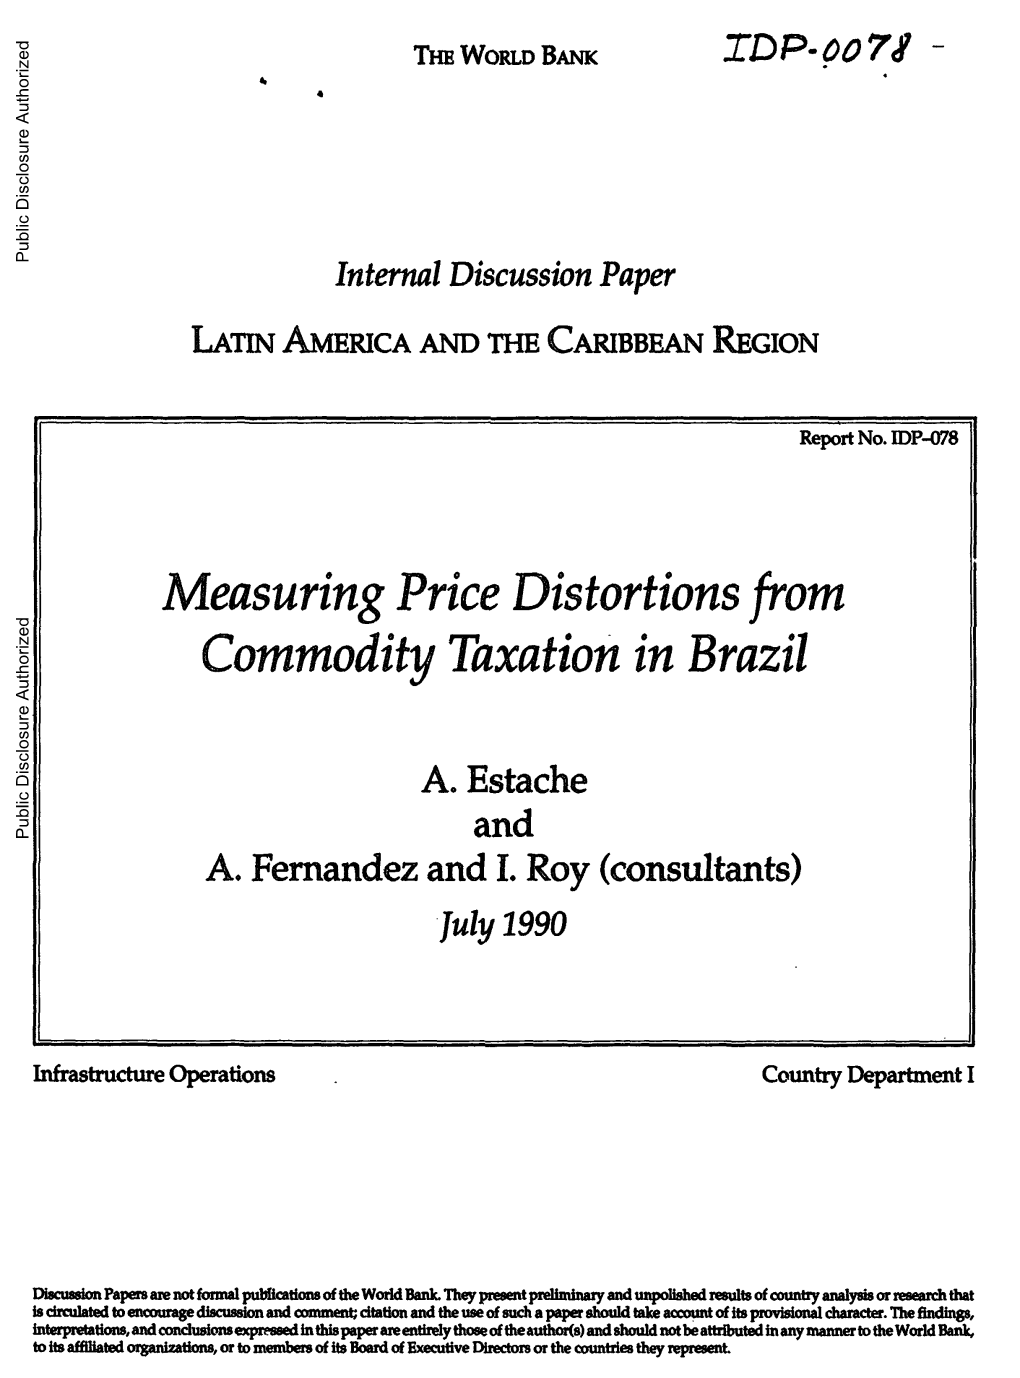 Measuring Price Distortions from Commodity Taxation in Brazil A